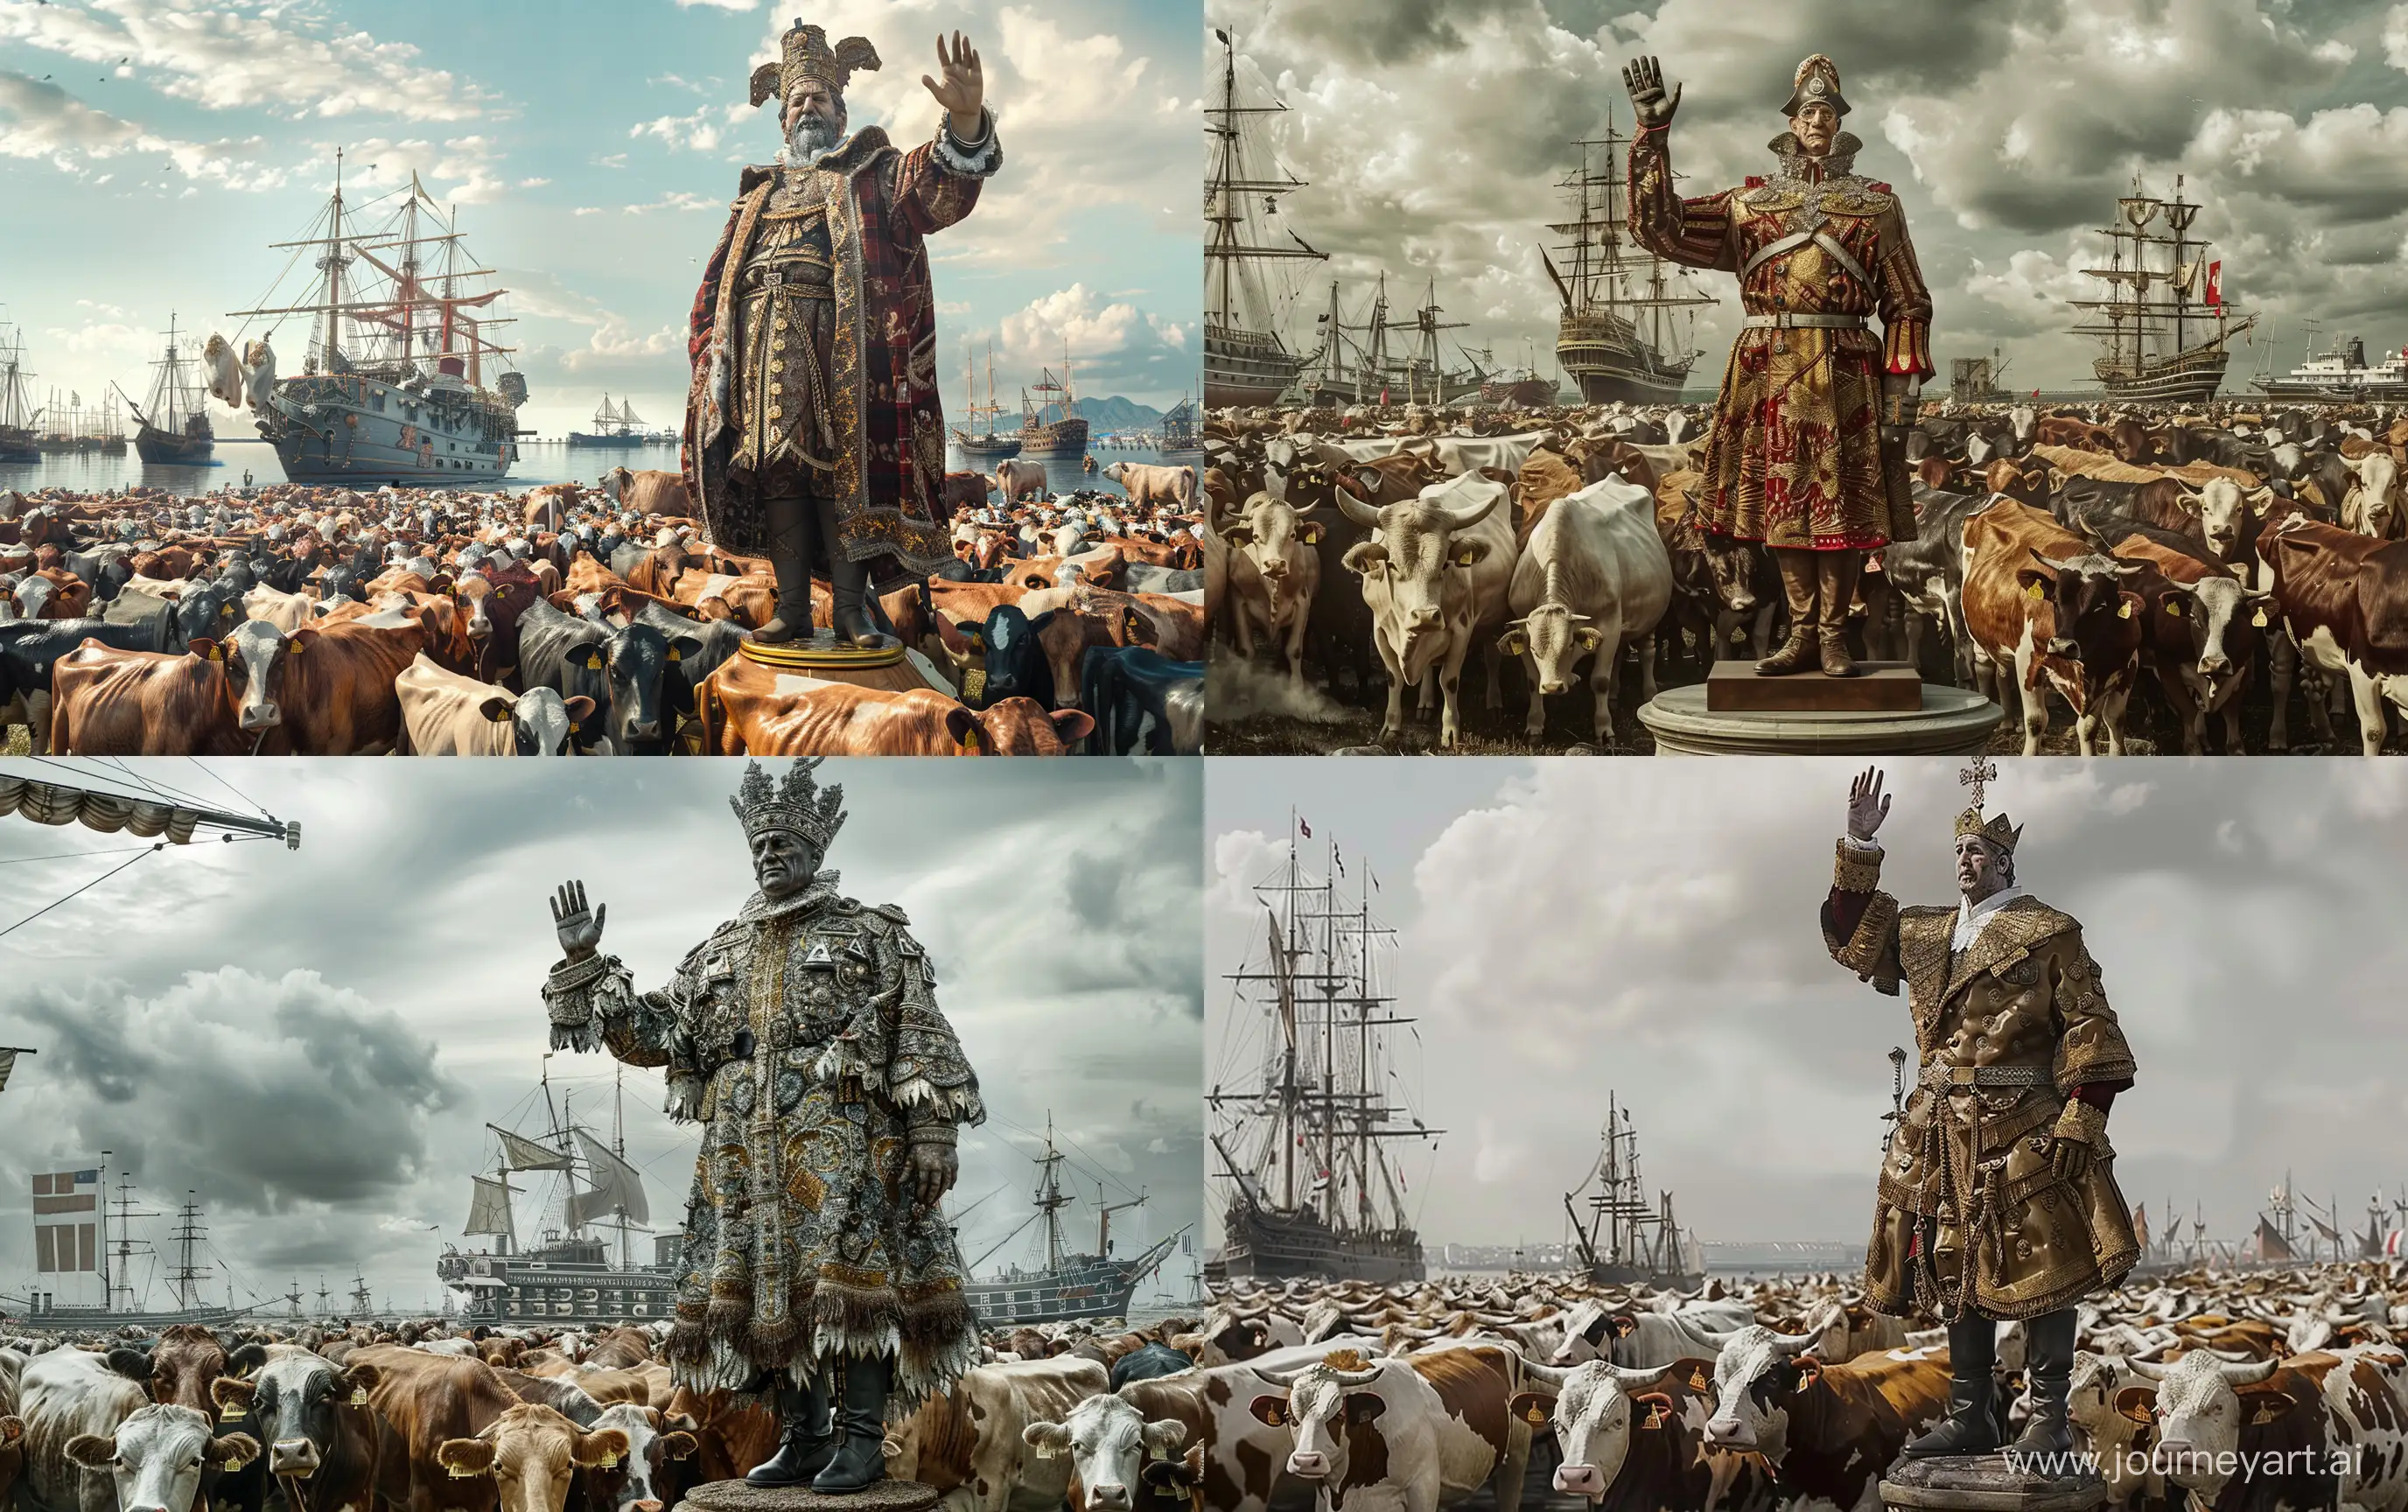 Monumental-Inquisitor-Overseeing-Cattle-and-Ships